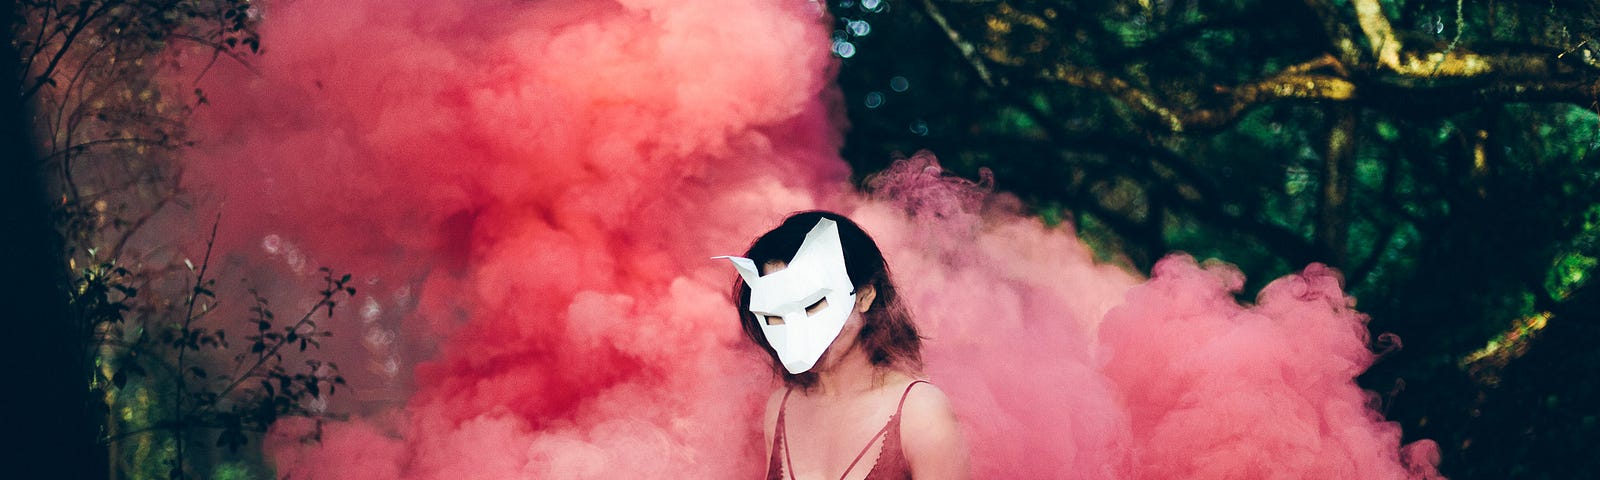 girl in red smoke with mask on